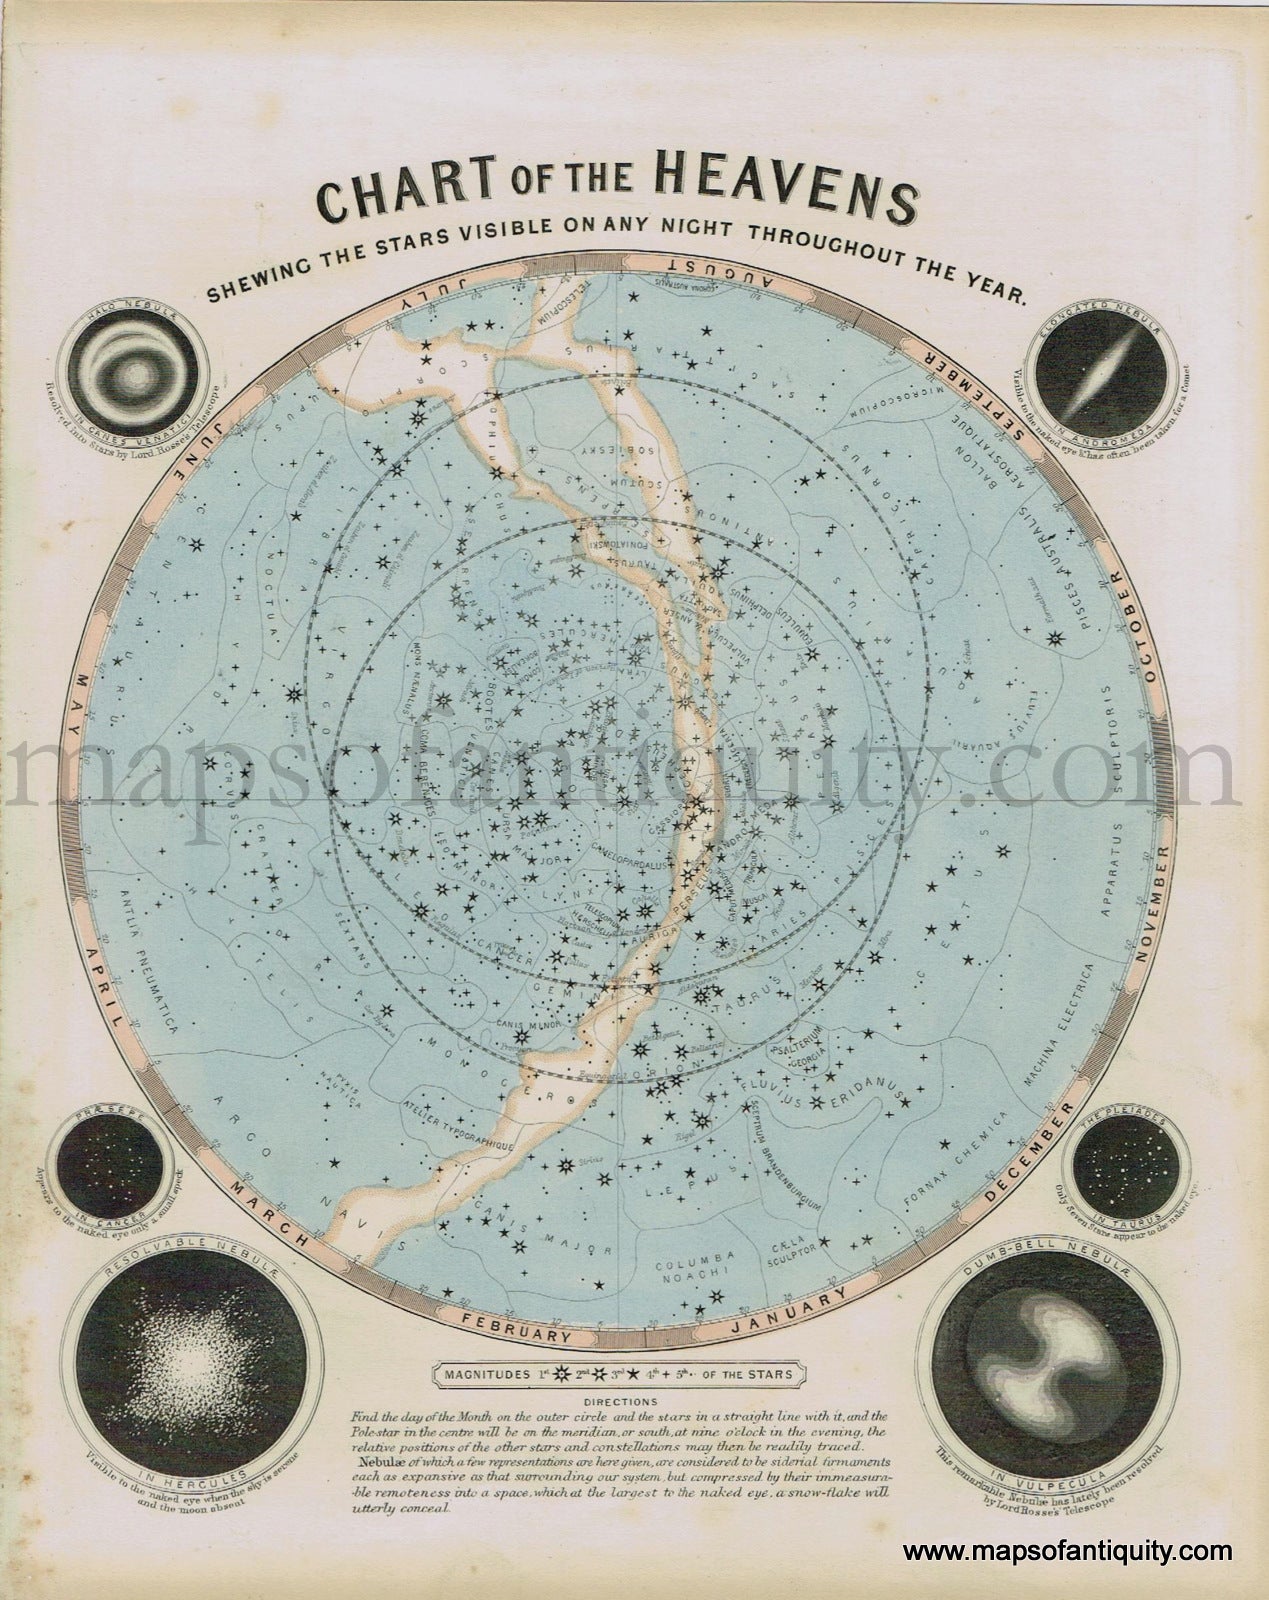 Antique-Map-Chart-Charts-of-the-Heavens-Shewing-the-Stars-Visible-on-Any-Night-Throughout-The-Year-Celestial-Constellation-Constellations-Star-Dower-1840s-1800s-Mid-19th-Century-Maps-of-Antiquity